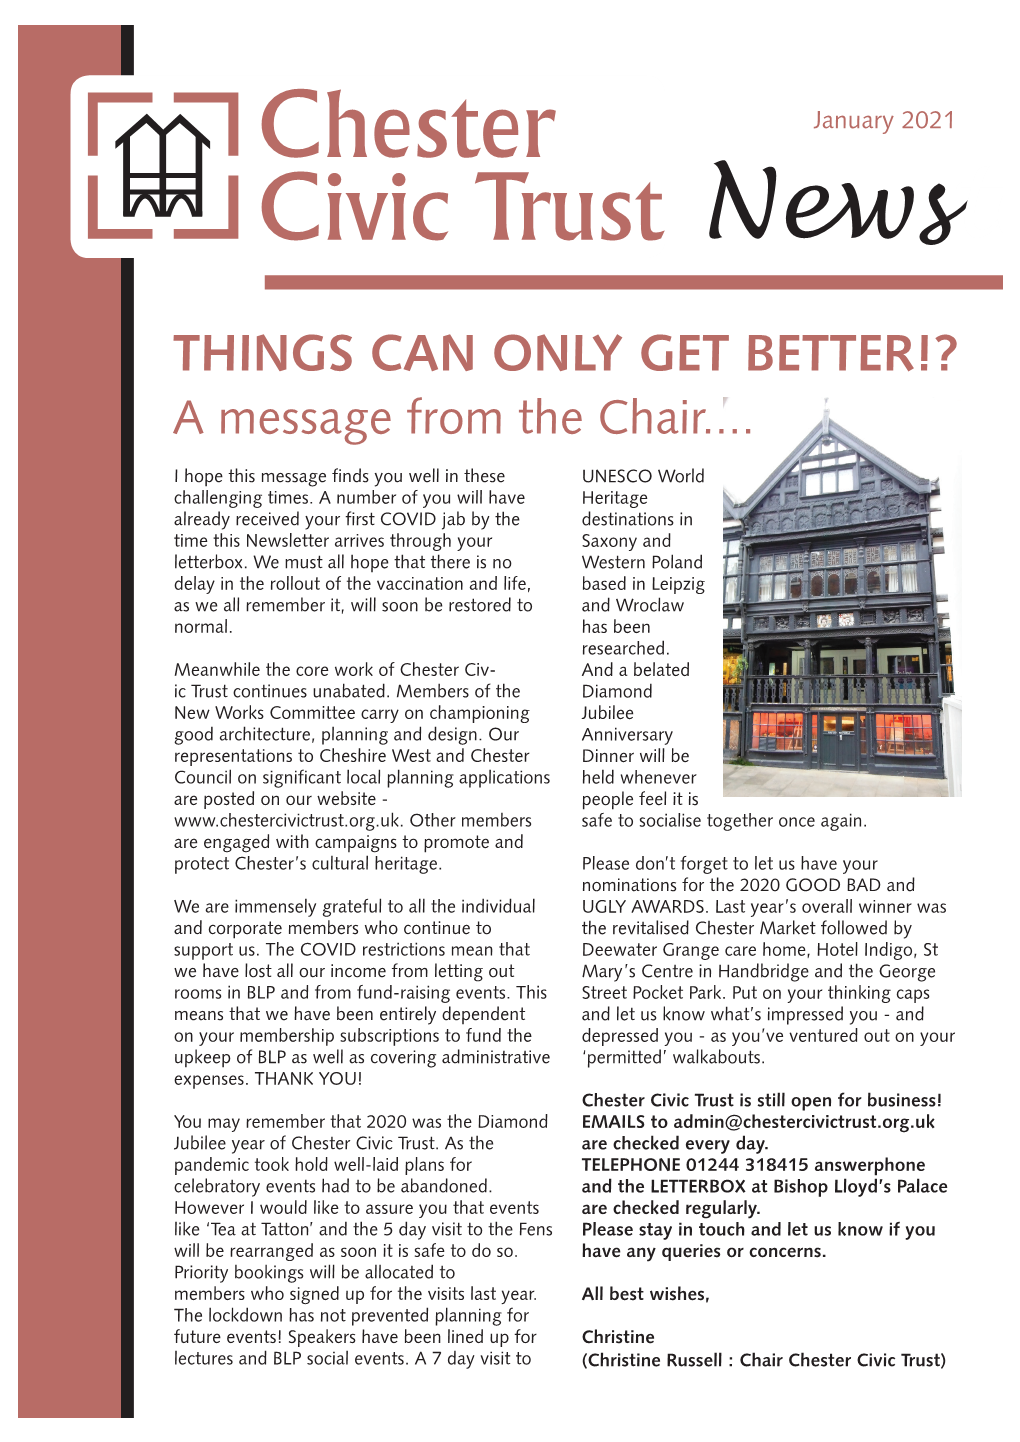 Newster THINGS CAN ONLY GET BETTER!? a Message from the Chair